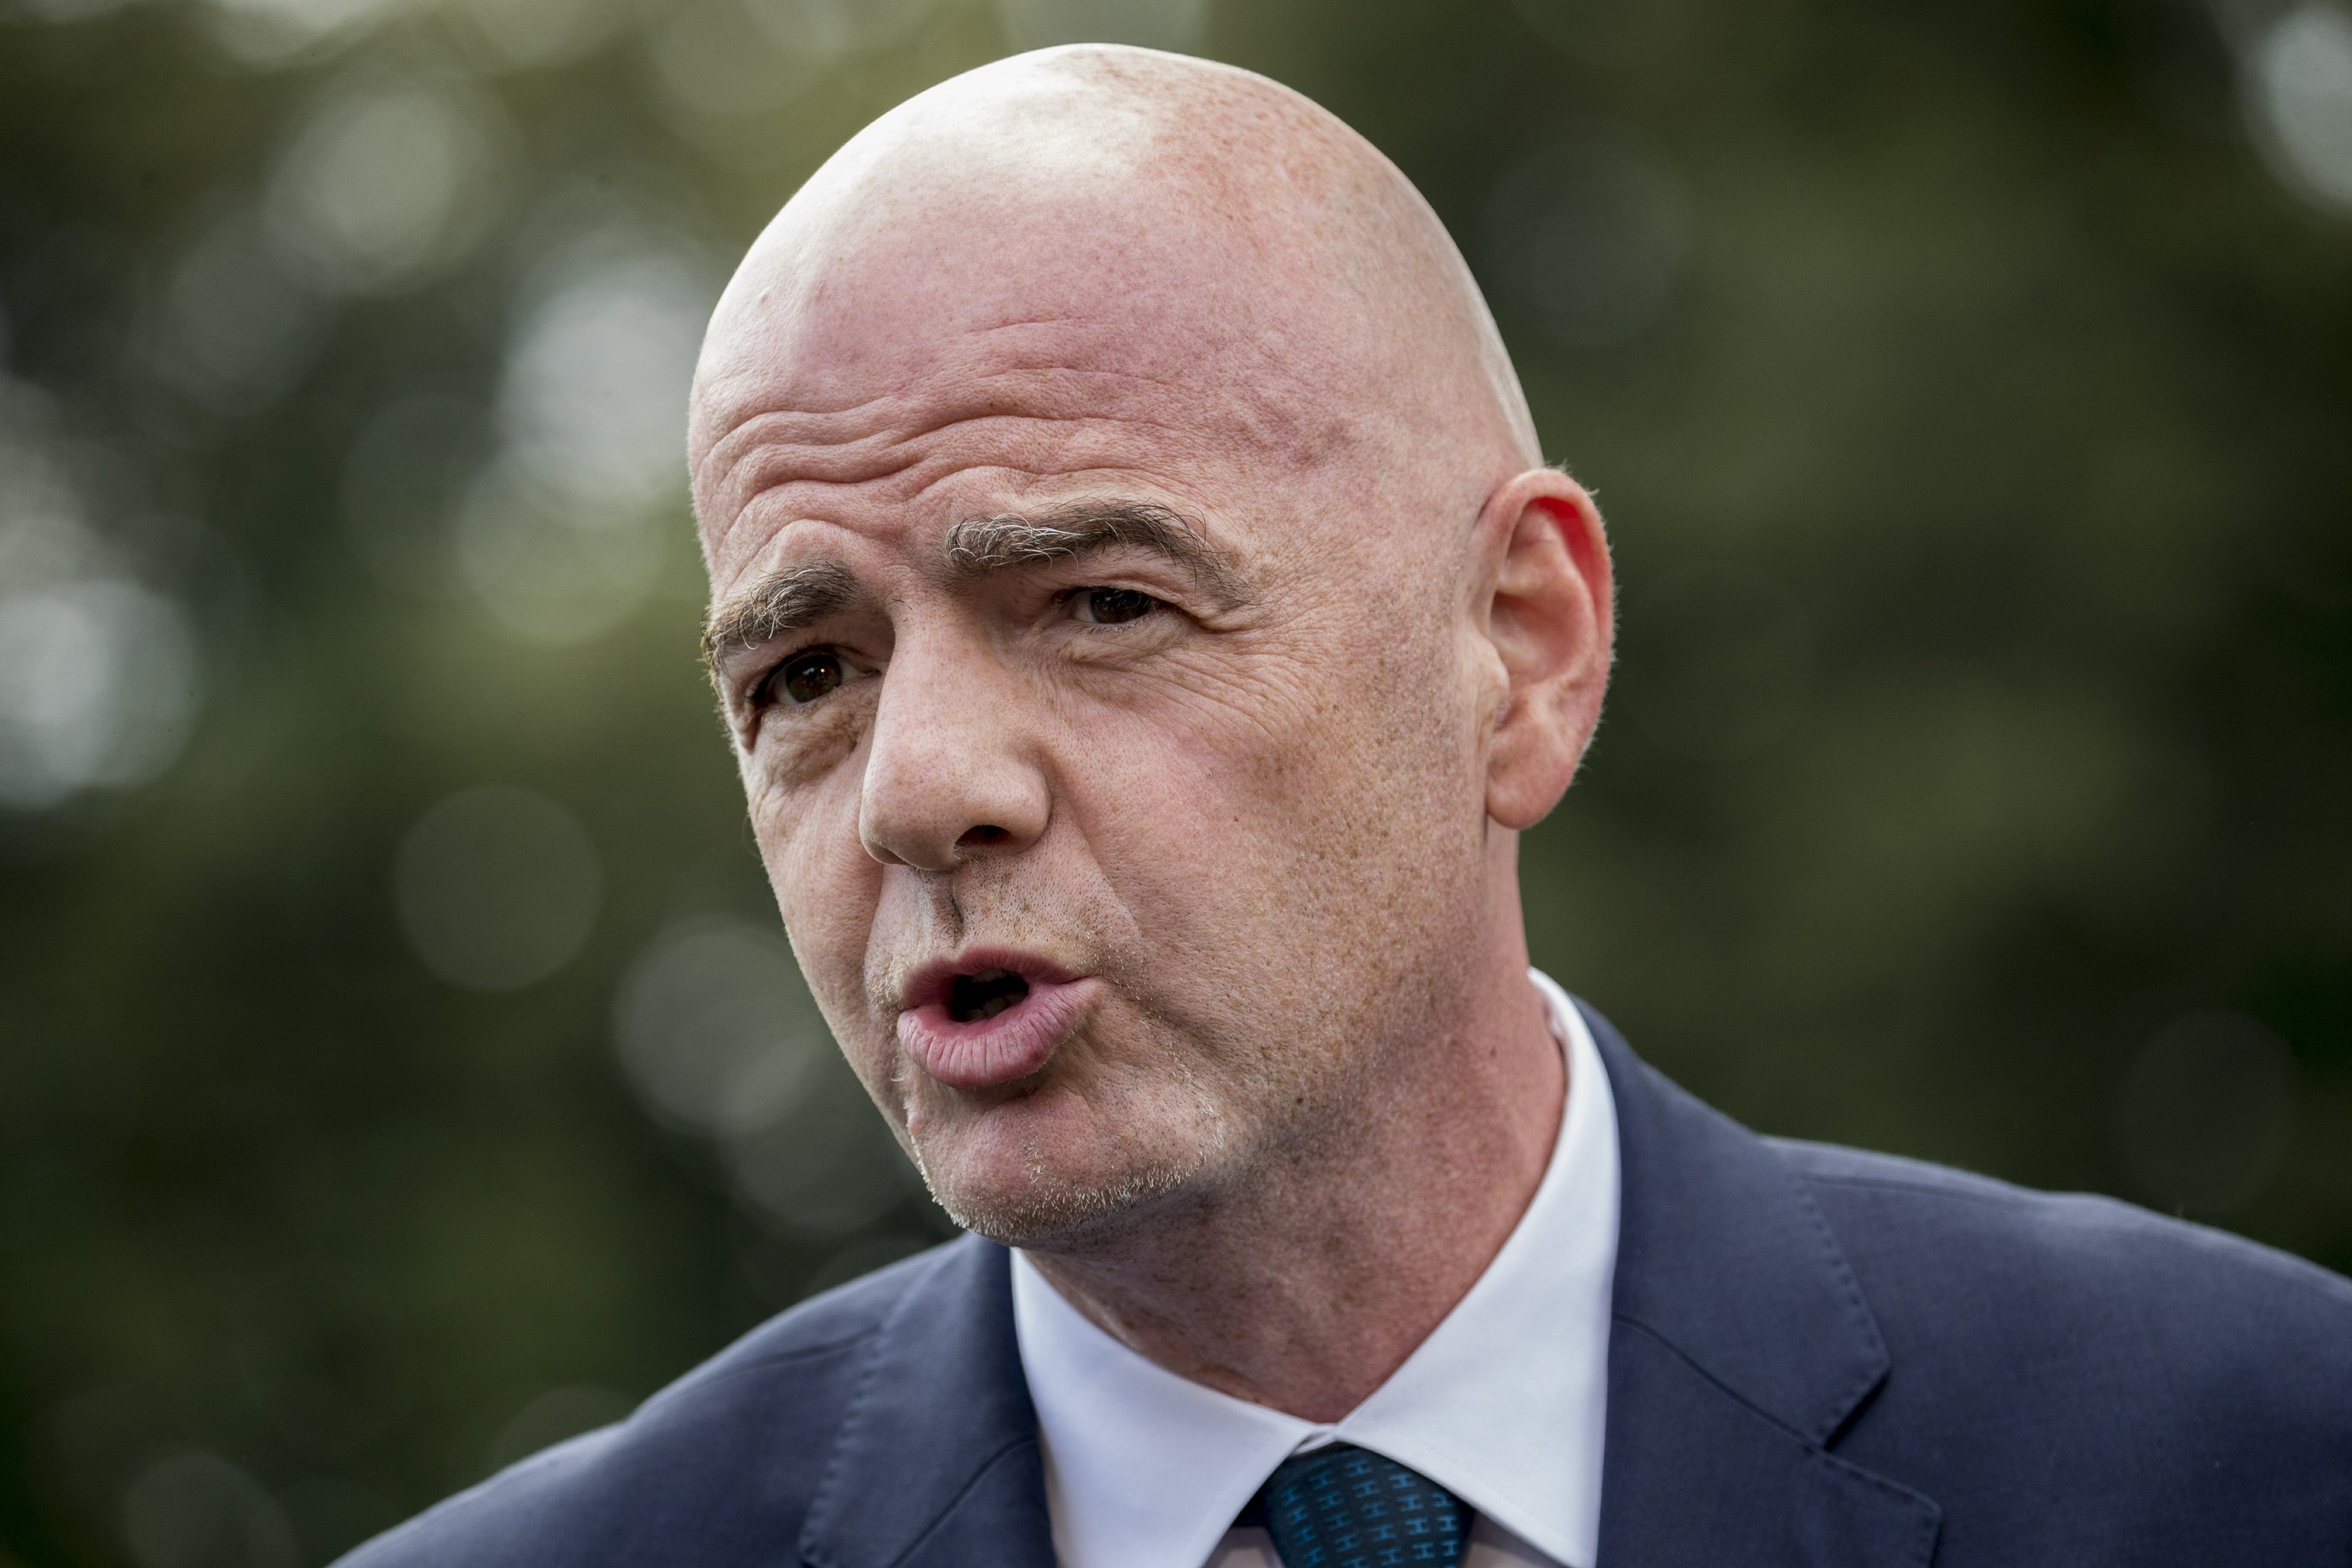 What is Gianni Infantino Net Worth: How Rich is The FIFA Topman in 2022?